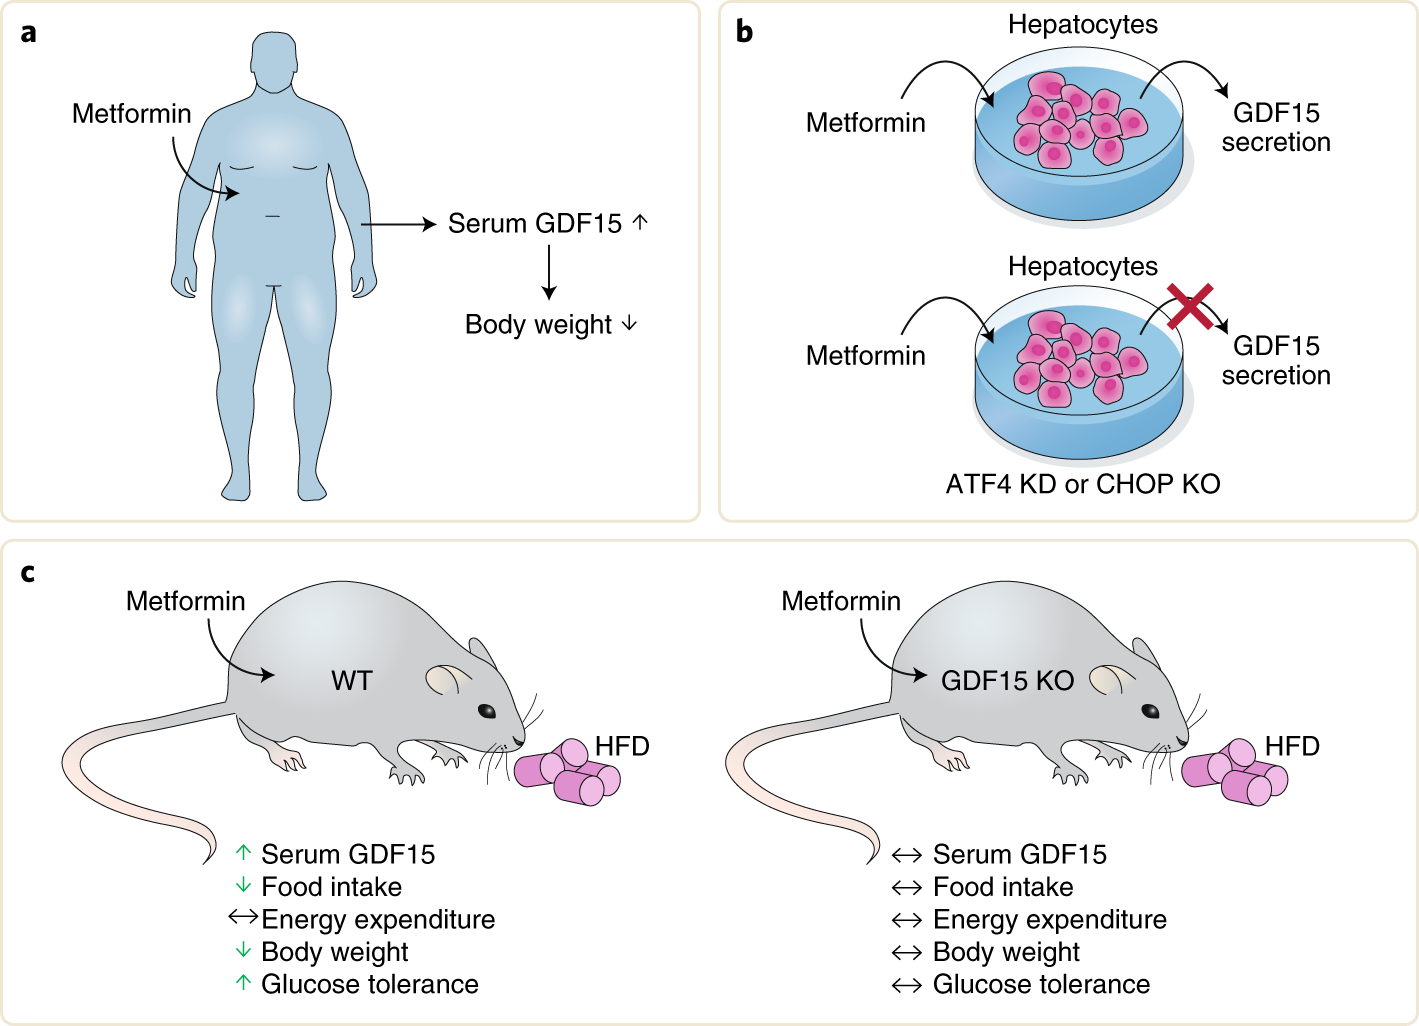 Teaching an old dog new tricks: metformin induces body-weight loss via  GDF15 | Nature Metabolism